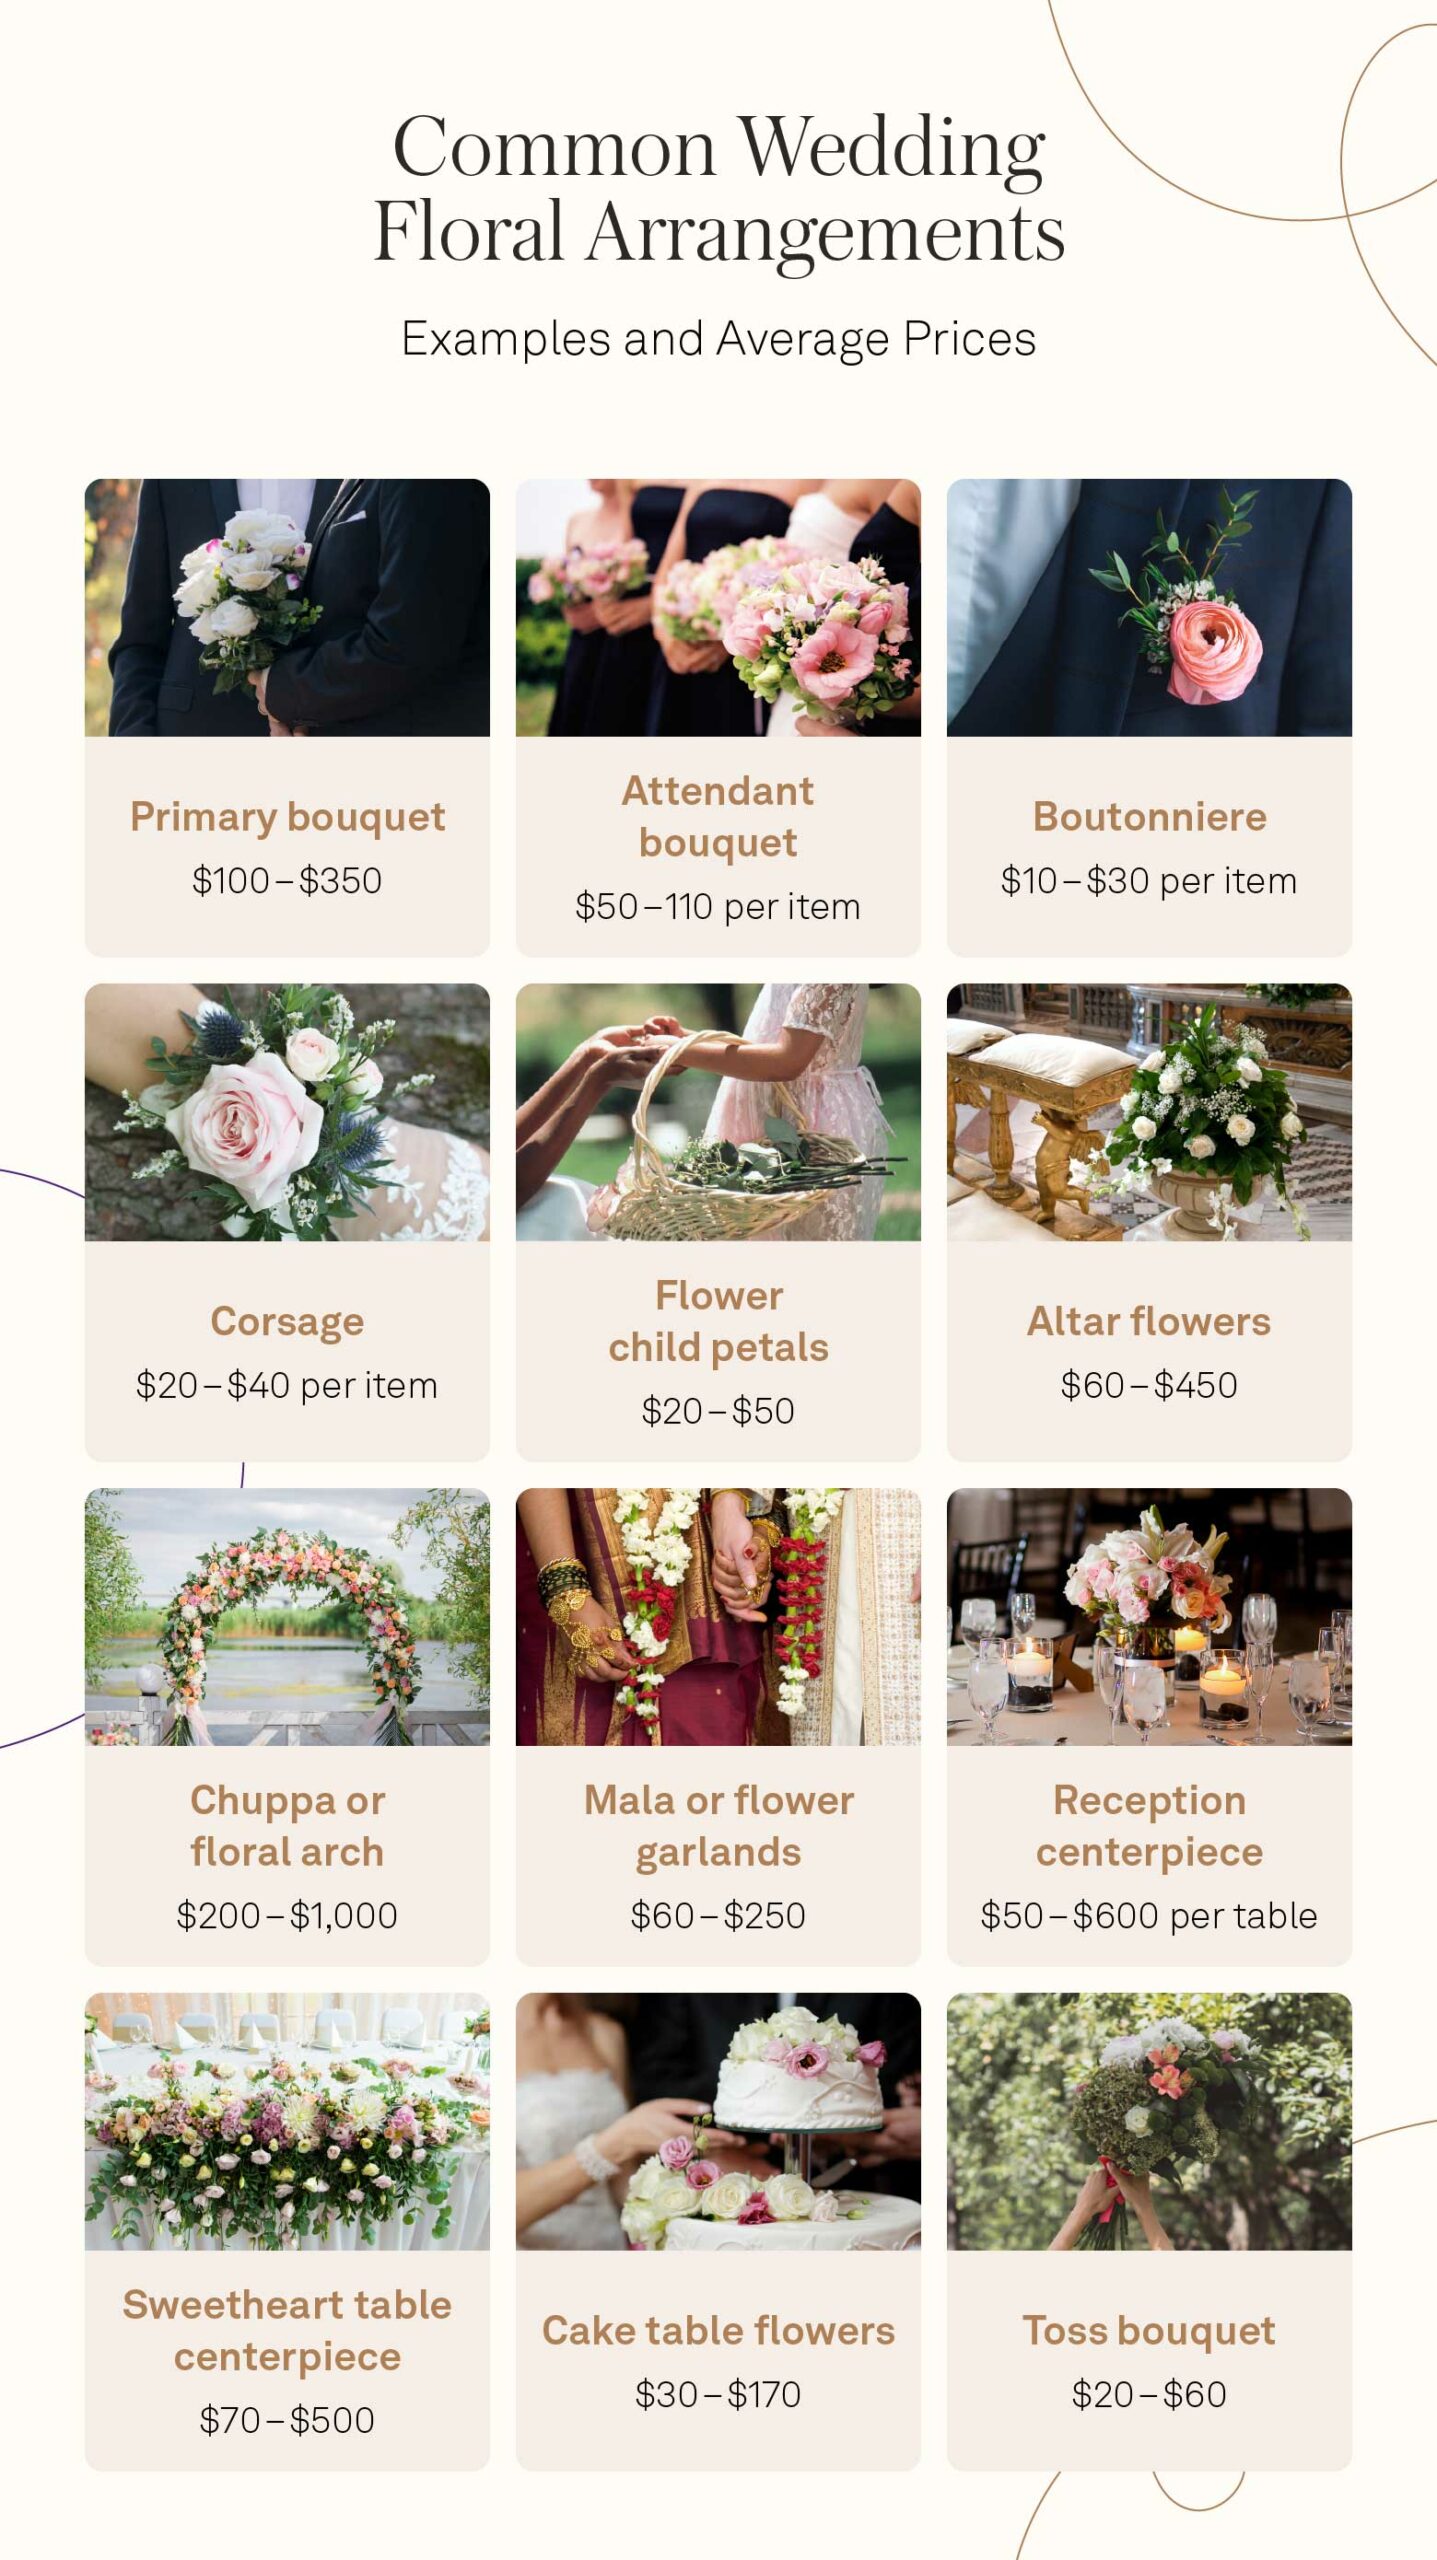 Chart of common wedding floral arrangements with example photos and their average prices